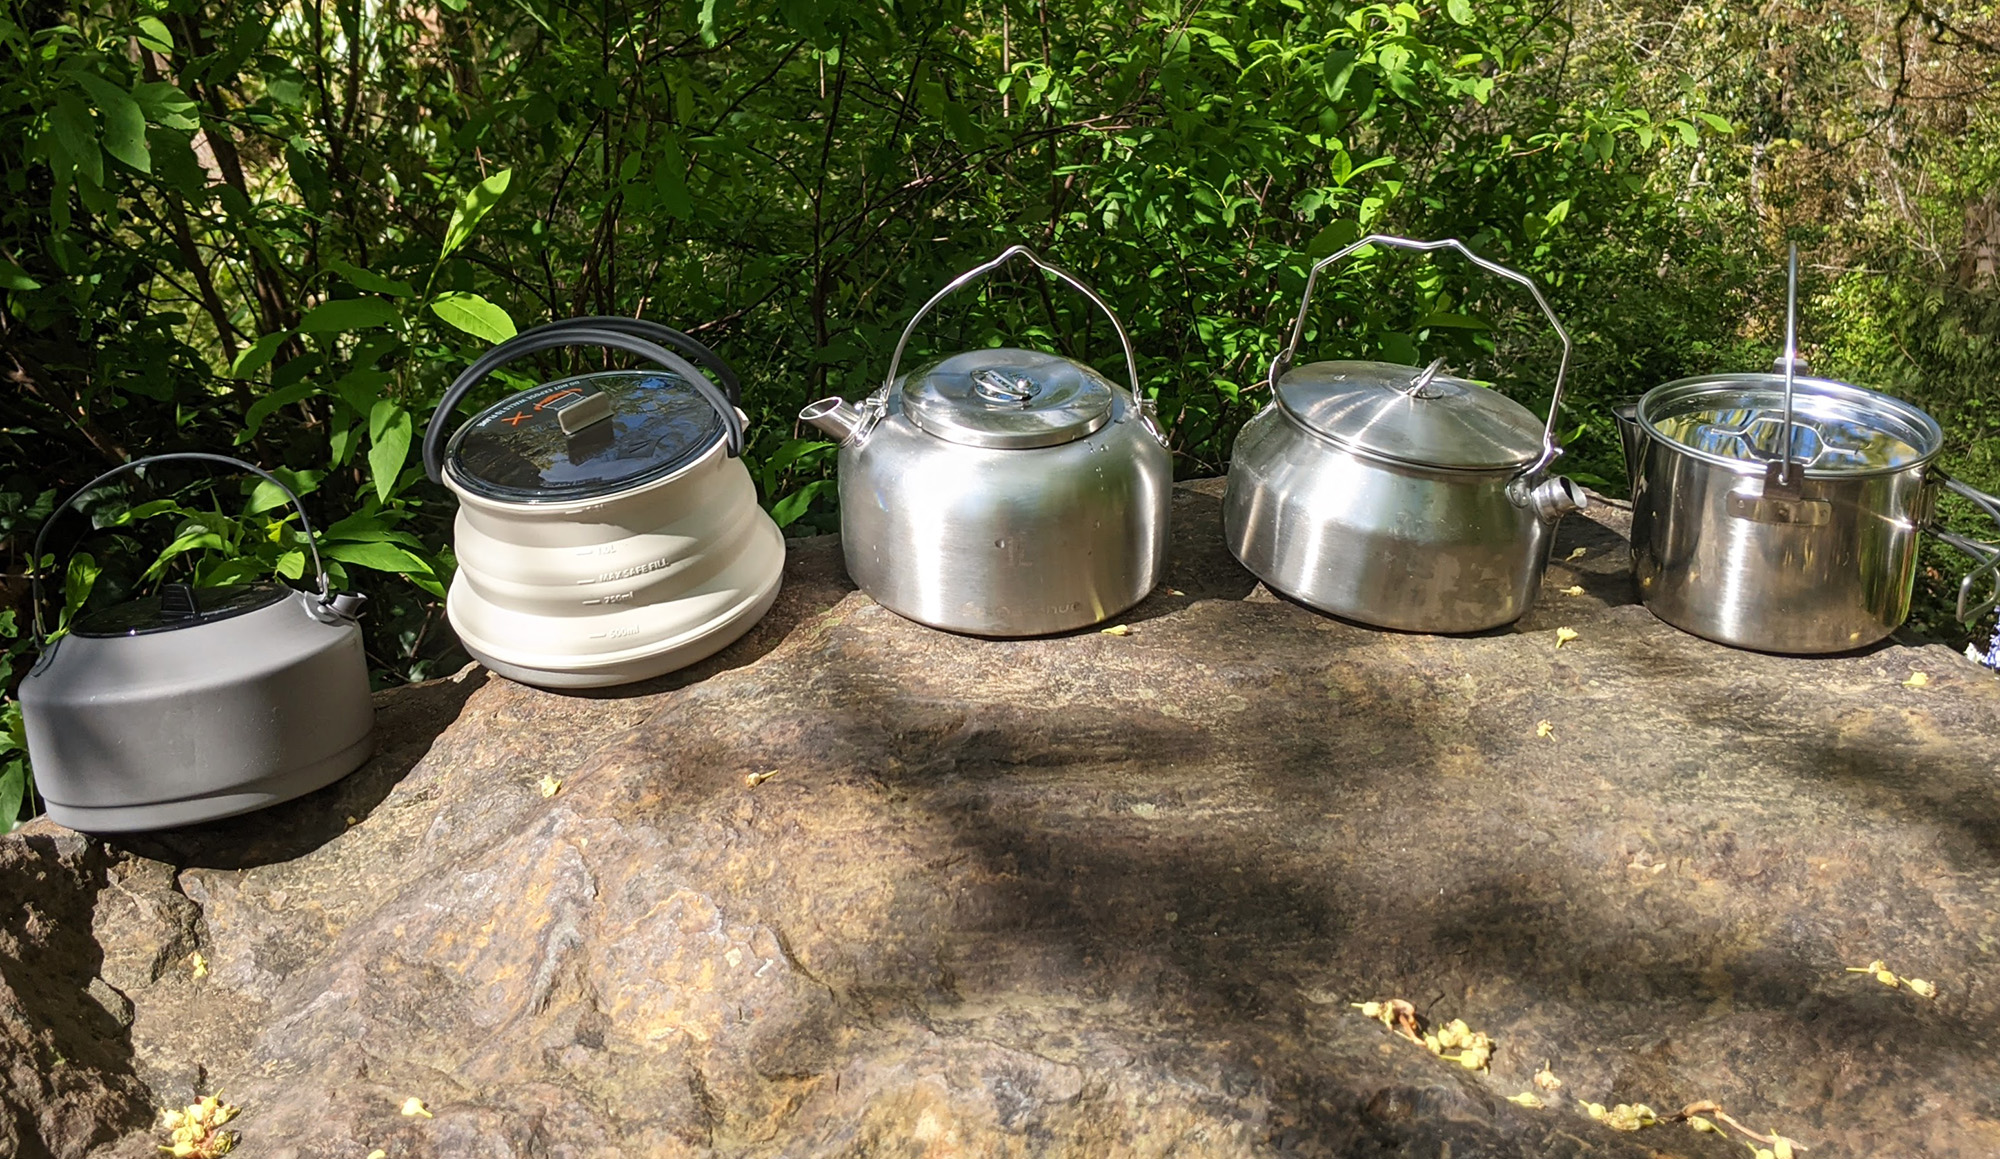 Collapsible Camping Kettle - Pop up style 